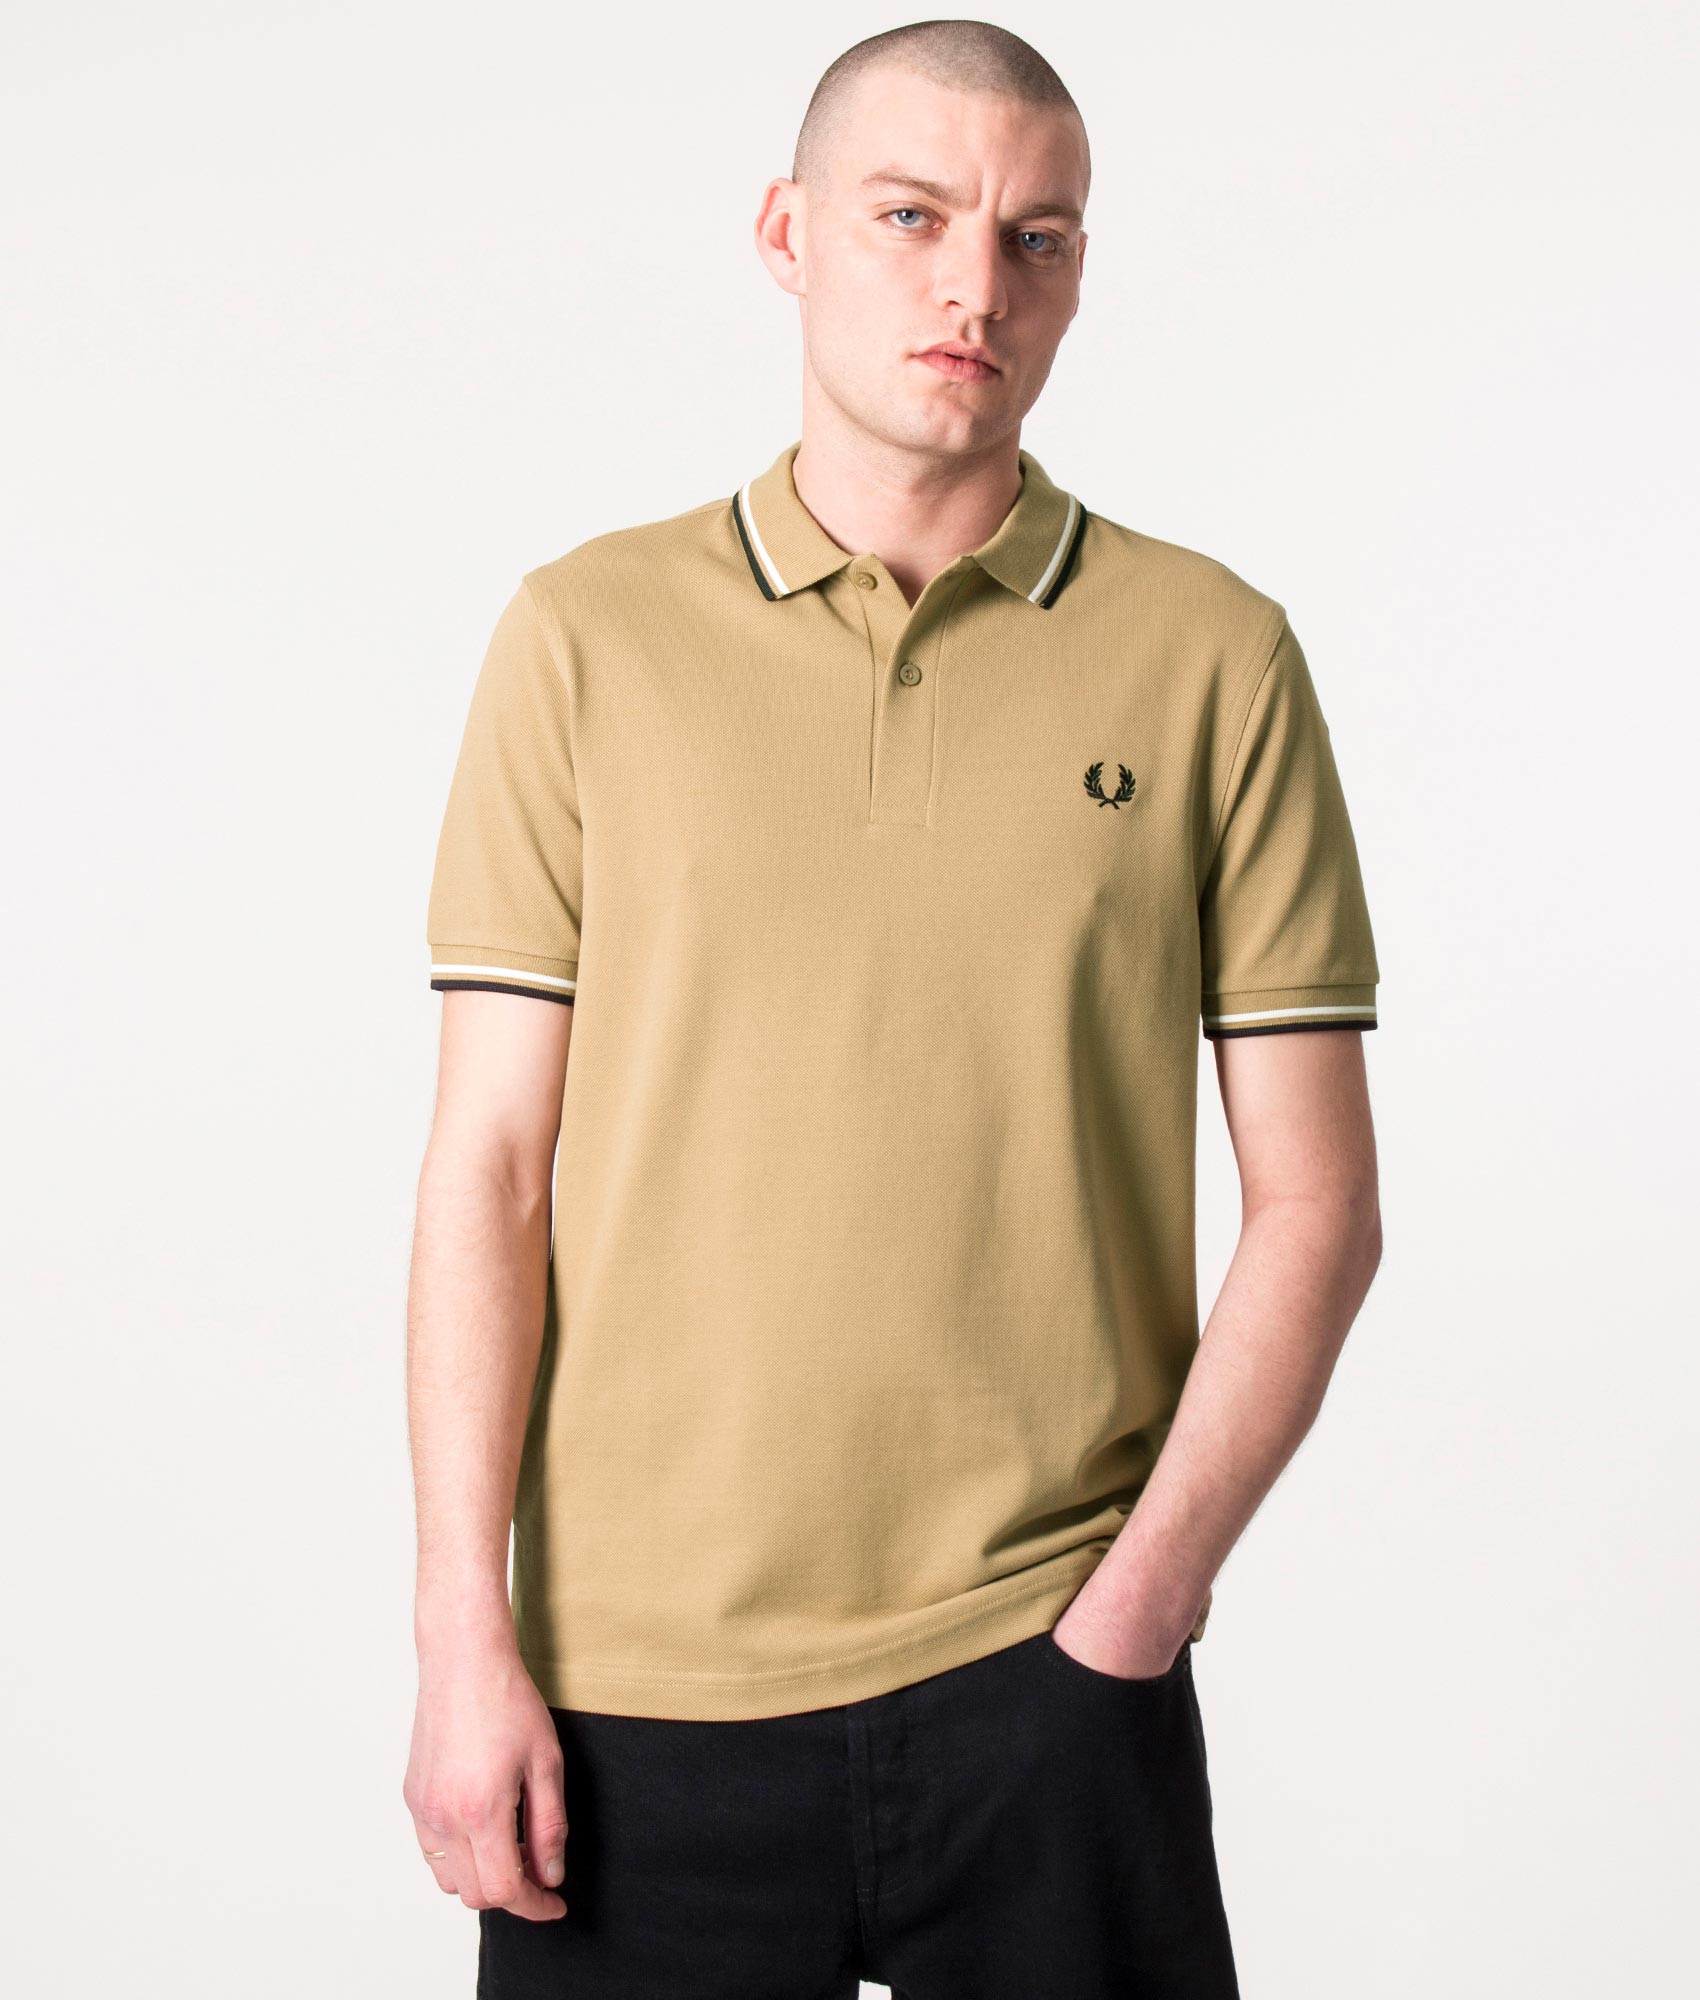 Tipped Fred Perry Polo Shirt Stone/White/Black Fred Perry EQVVS